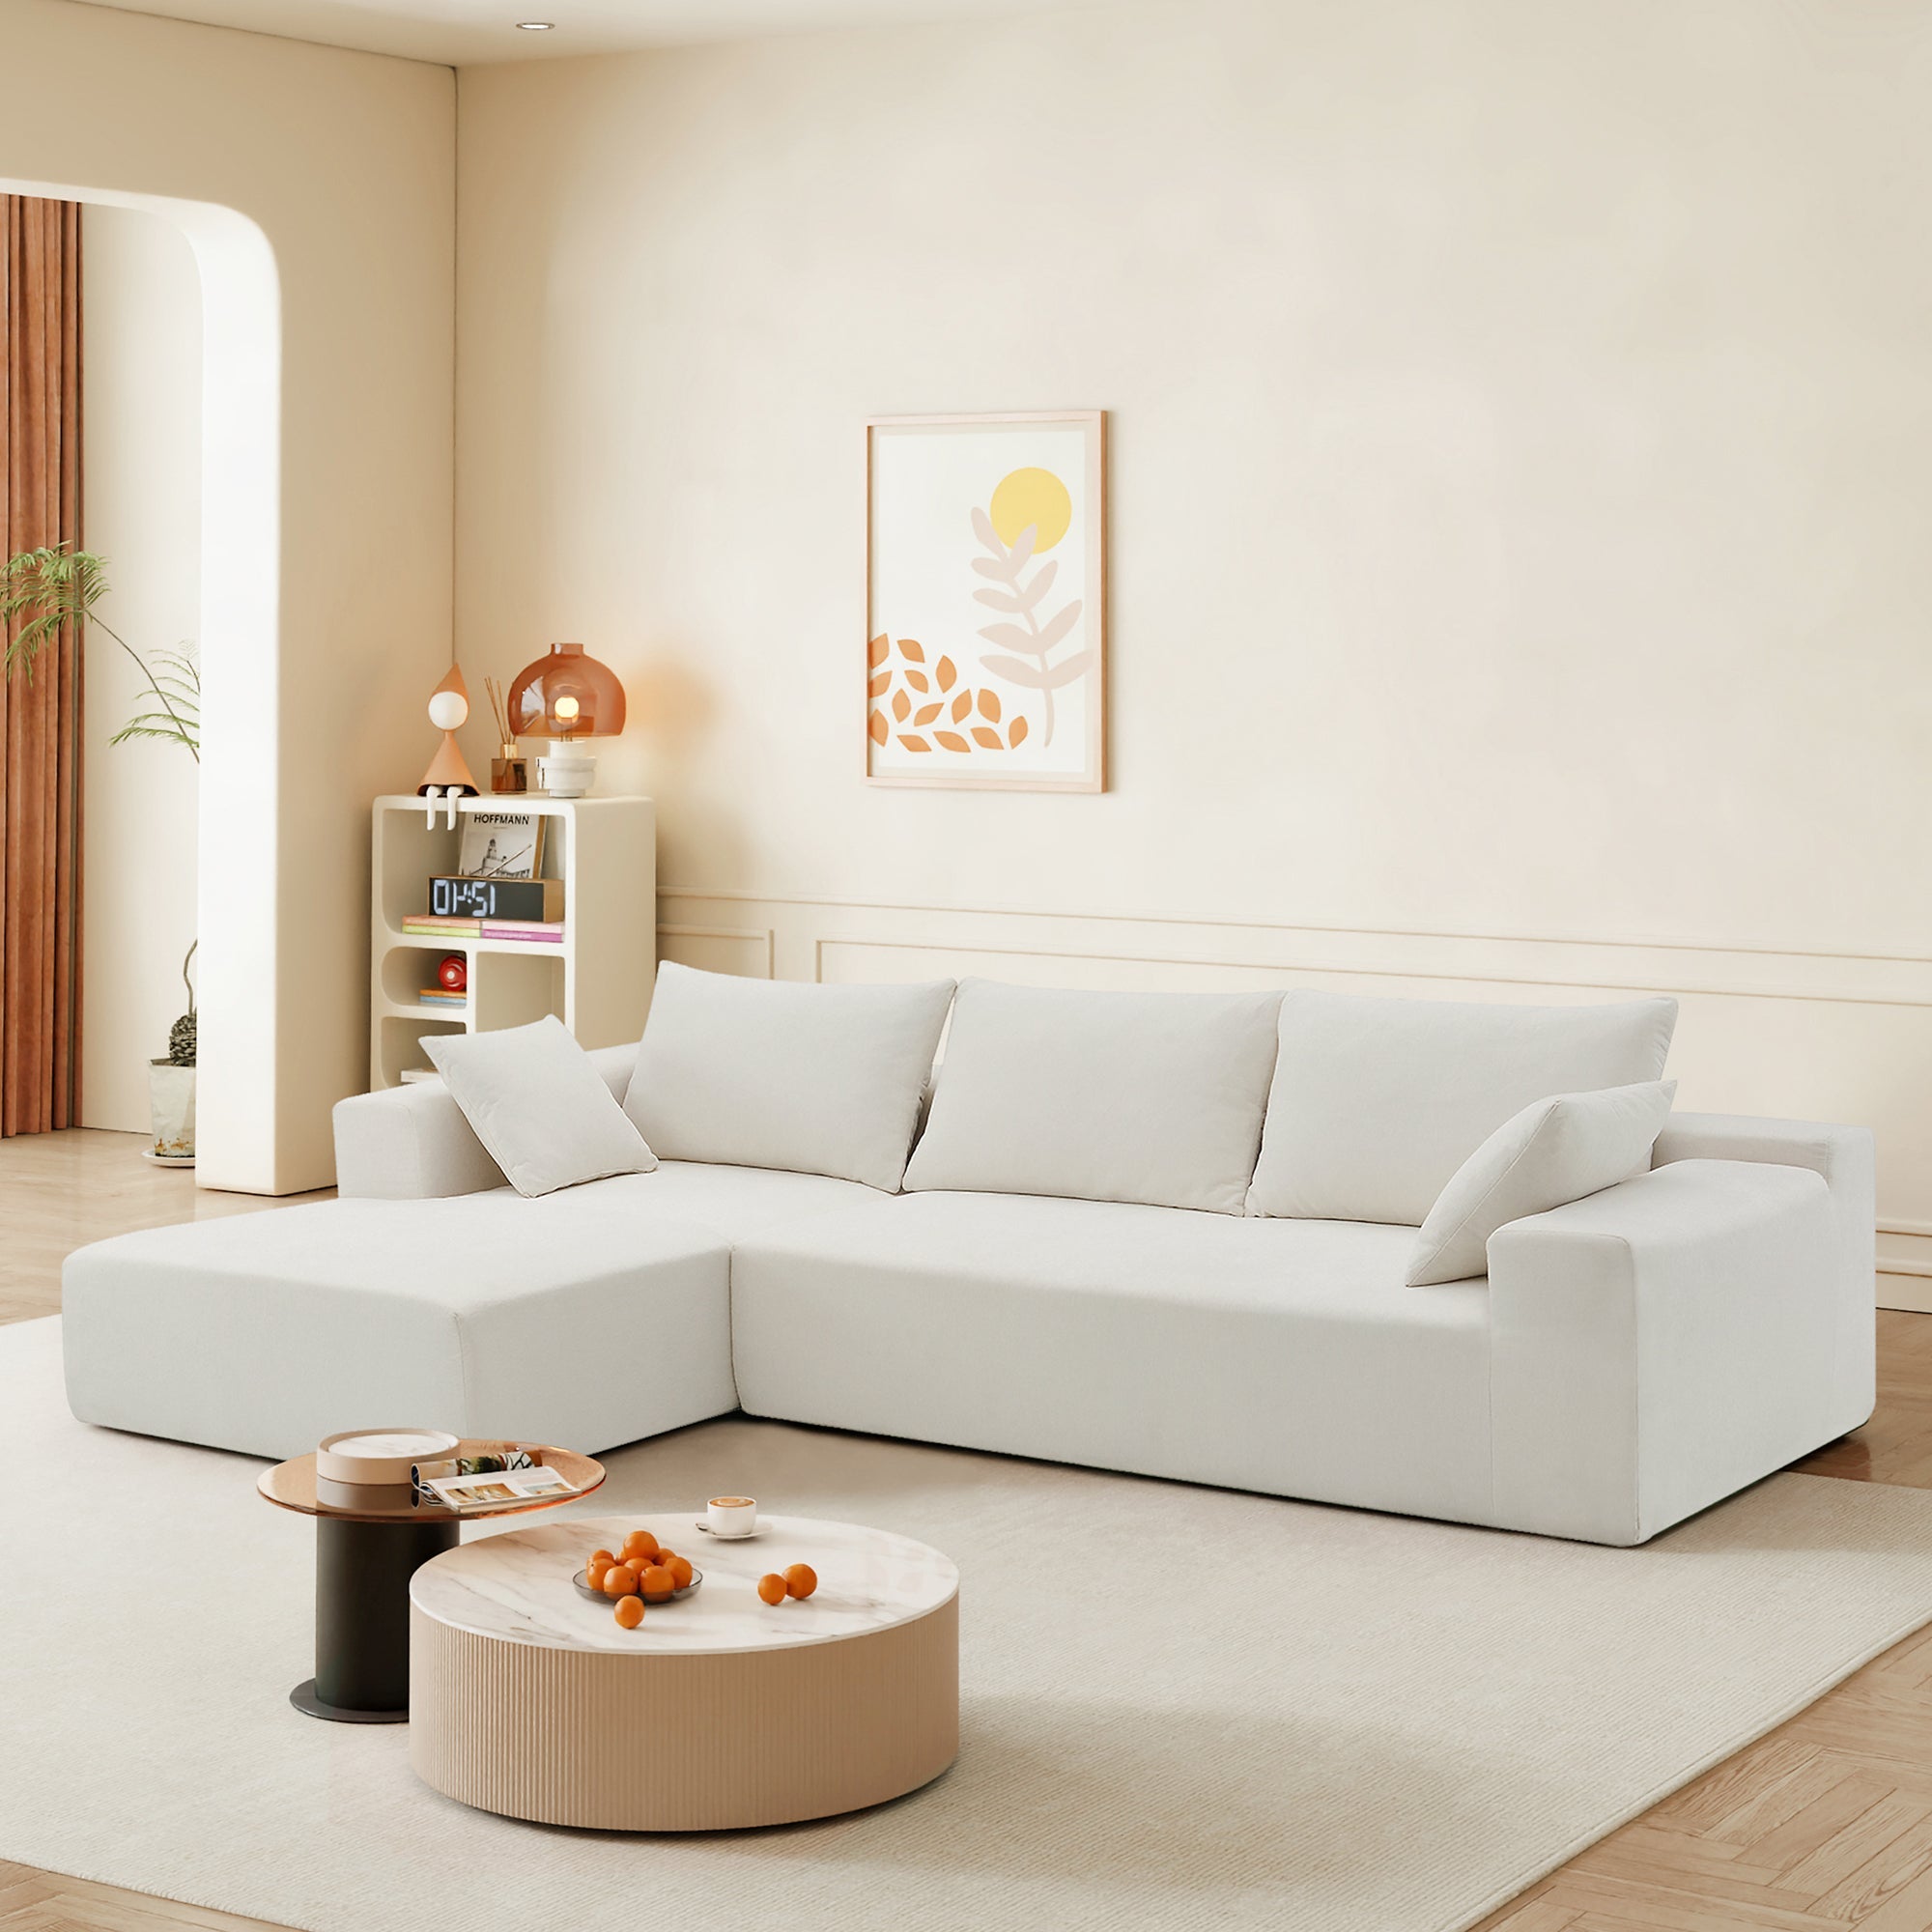 Cozy White L-Shape Chenille Sectional - Modern Modular Sleeper Sofa-Stationary Sectionals-American Furniture Outlet